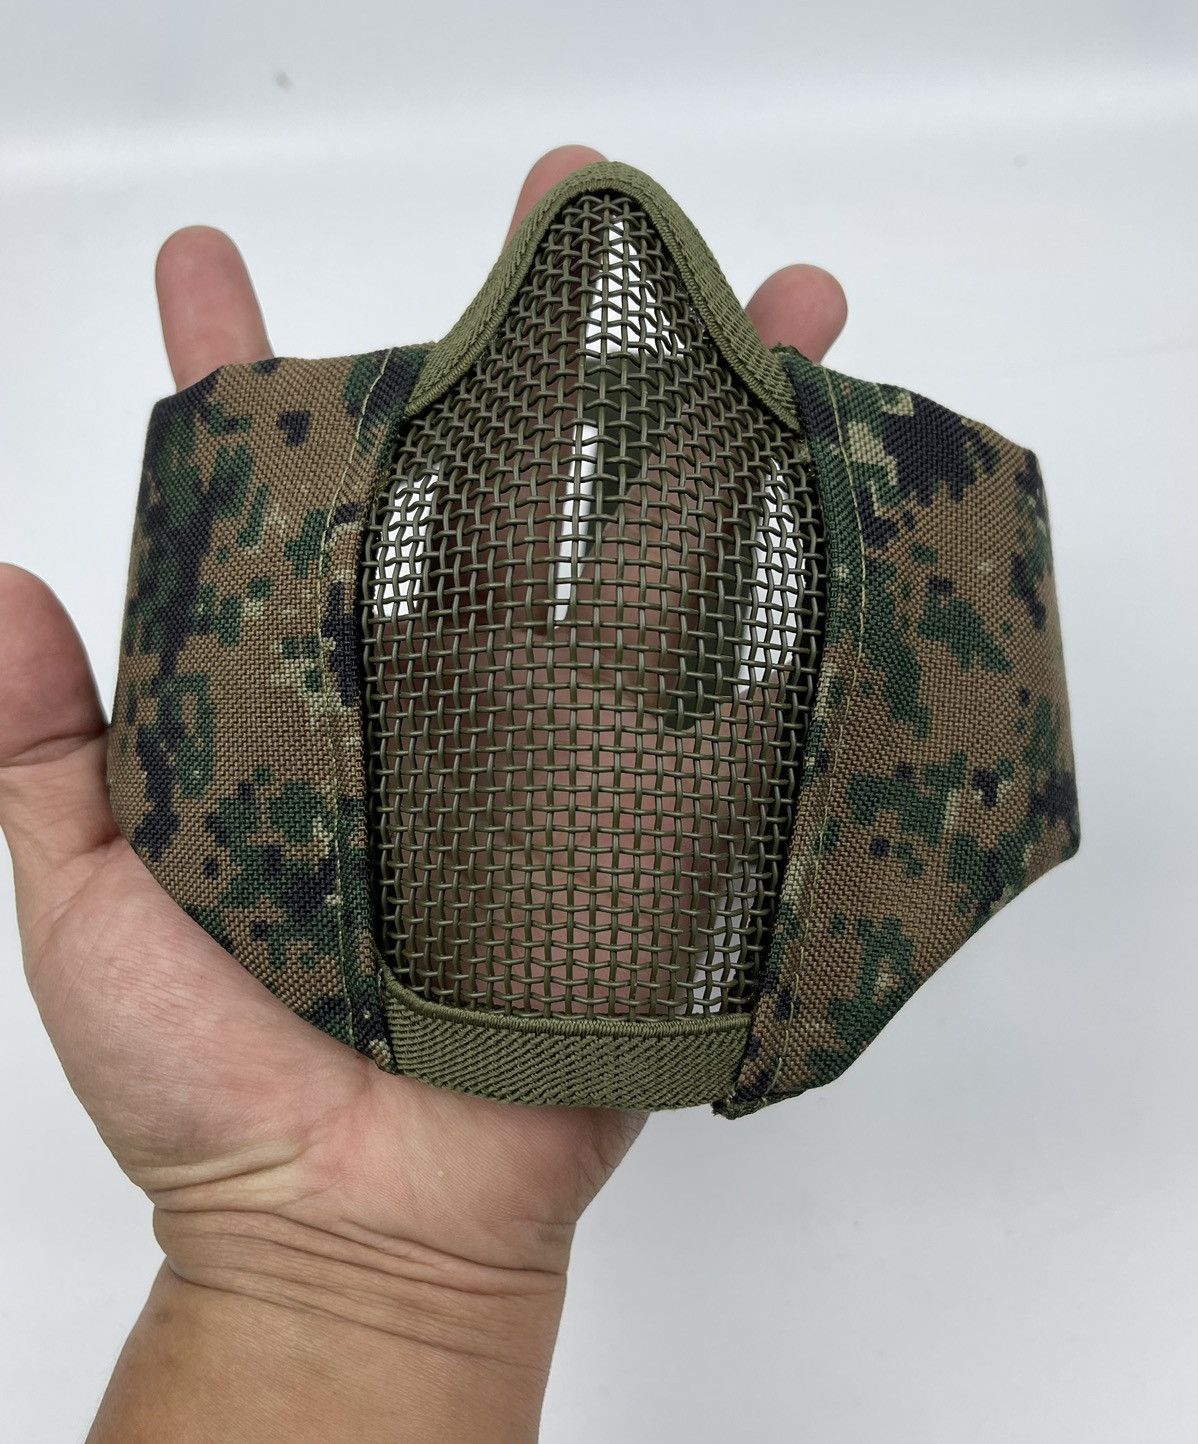 Vintage - camo army style mask tg1 - 8